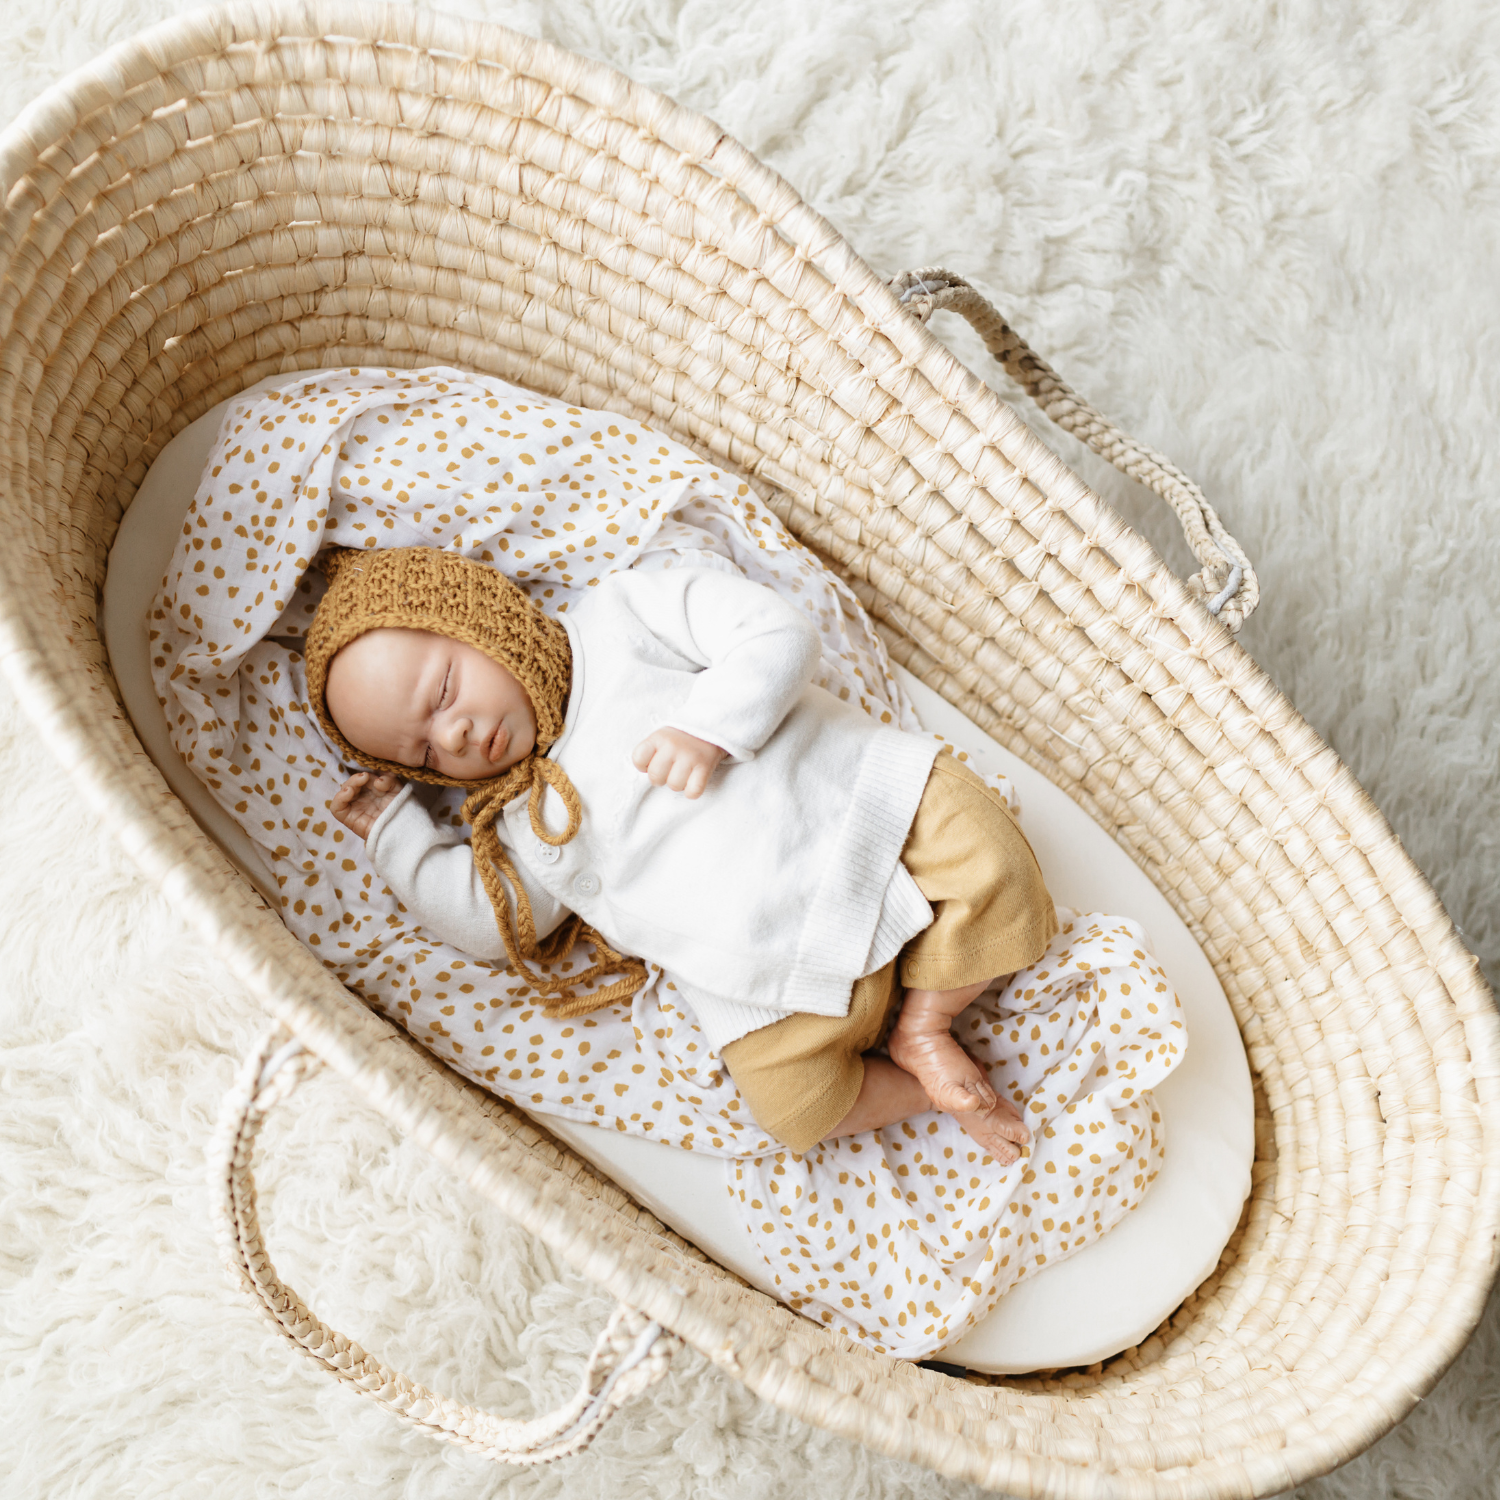 Newborn lying on a white sheet in an undressed natural palm moses basket | Parenting tips and advice - Clair de Lune UK